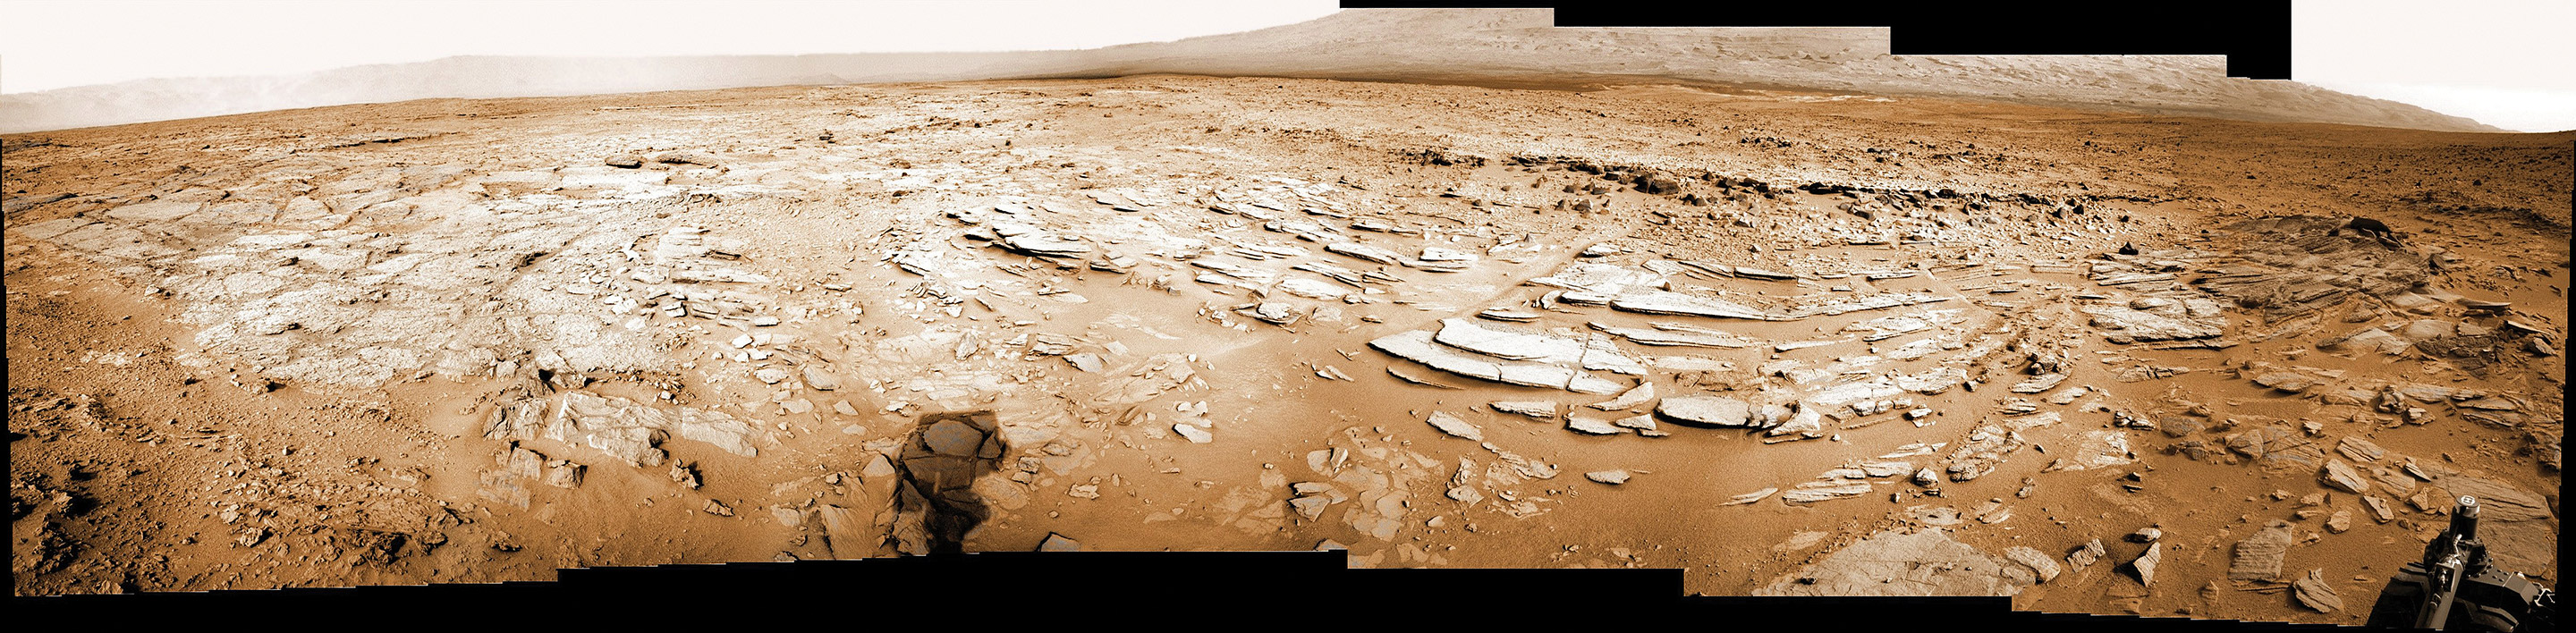 Sol 120 colorized panorama shows big Shaler layered rock outcrop snapped by Curiosity’s right eye Navigation Camera (Navcam) on Dec. 7, 2012. Shaler exhibits a pattern known as ‘crossbedding’, at angles to one another. Mount Sharp visible in the background. Credit: NASA/JPL-Caltech/Ken Kremer/Marco Di Lorenzo